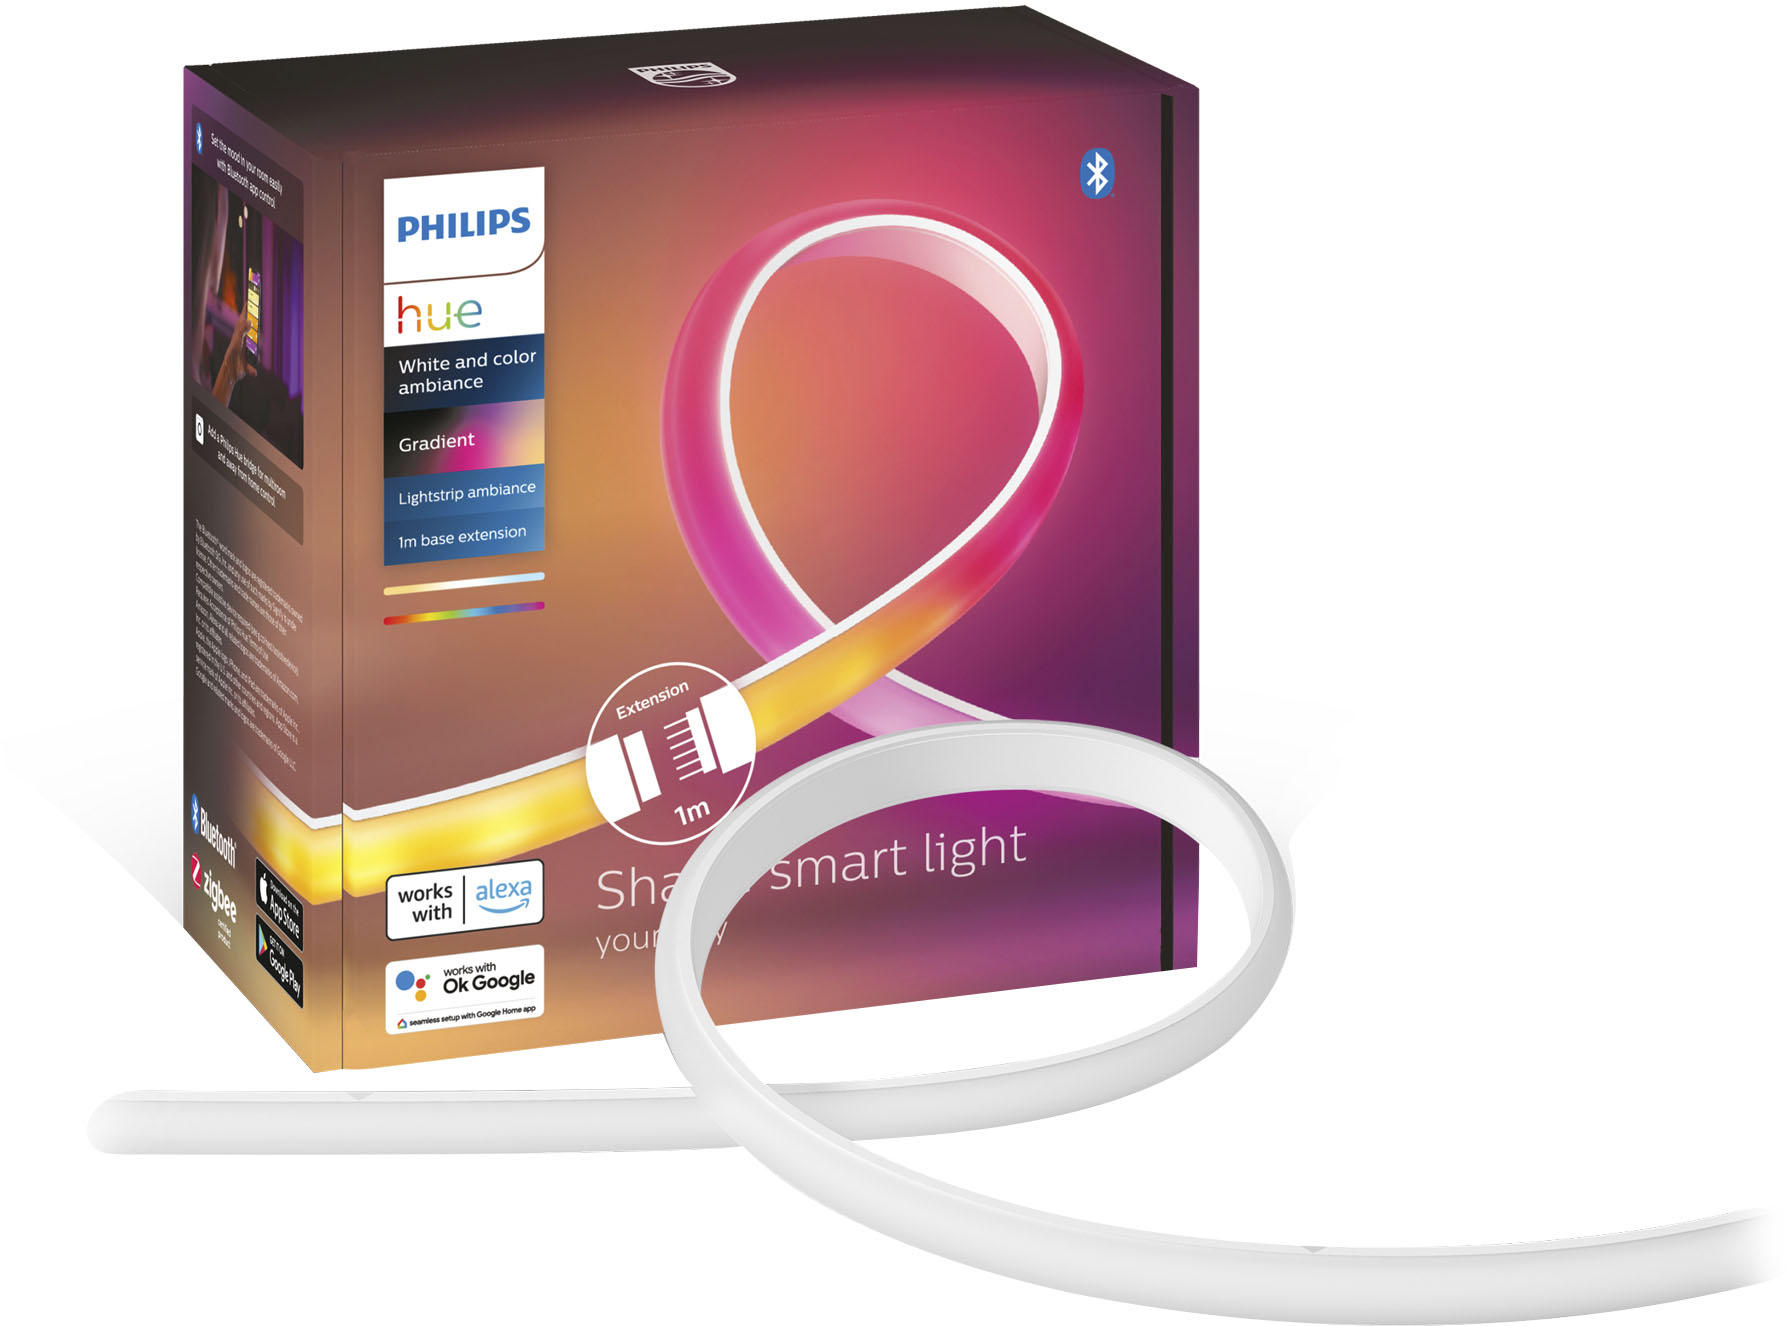 Angle View: Philips - Hue Ambiance Gradient Lightstrip Extension